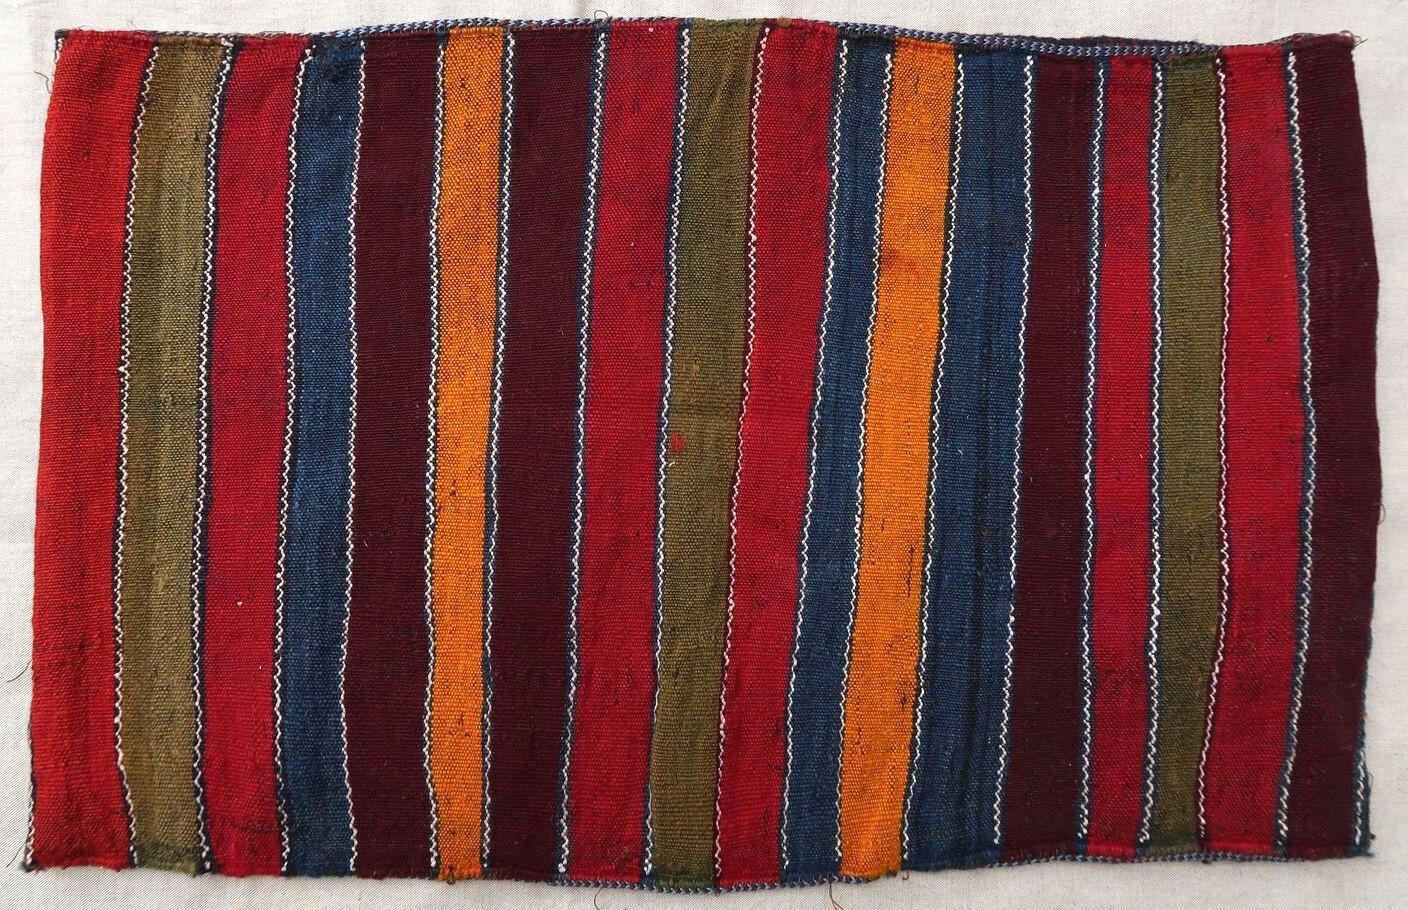 Handmade vintage Moroccan Berber cushion made out of vintage Kilim. The flat-weave is from the middle of the 20th century, it is in original good condition. 

- Condition: original good,

- circa 1950s,

- Size: 1.4' x 2.2' (42cm x 67cm),

-